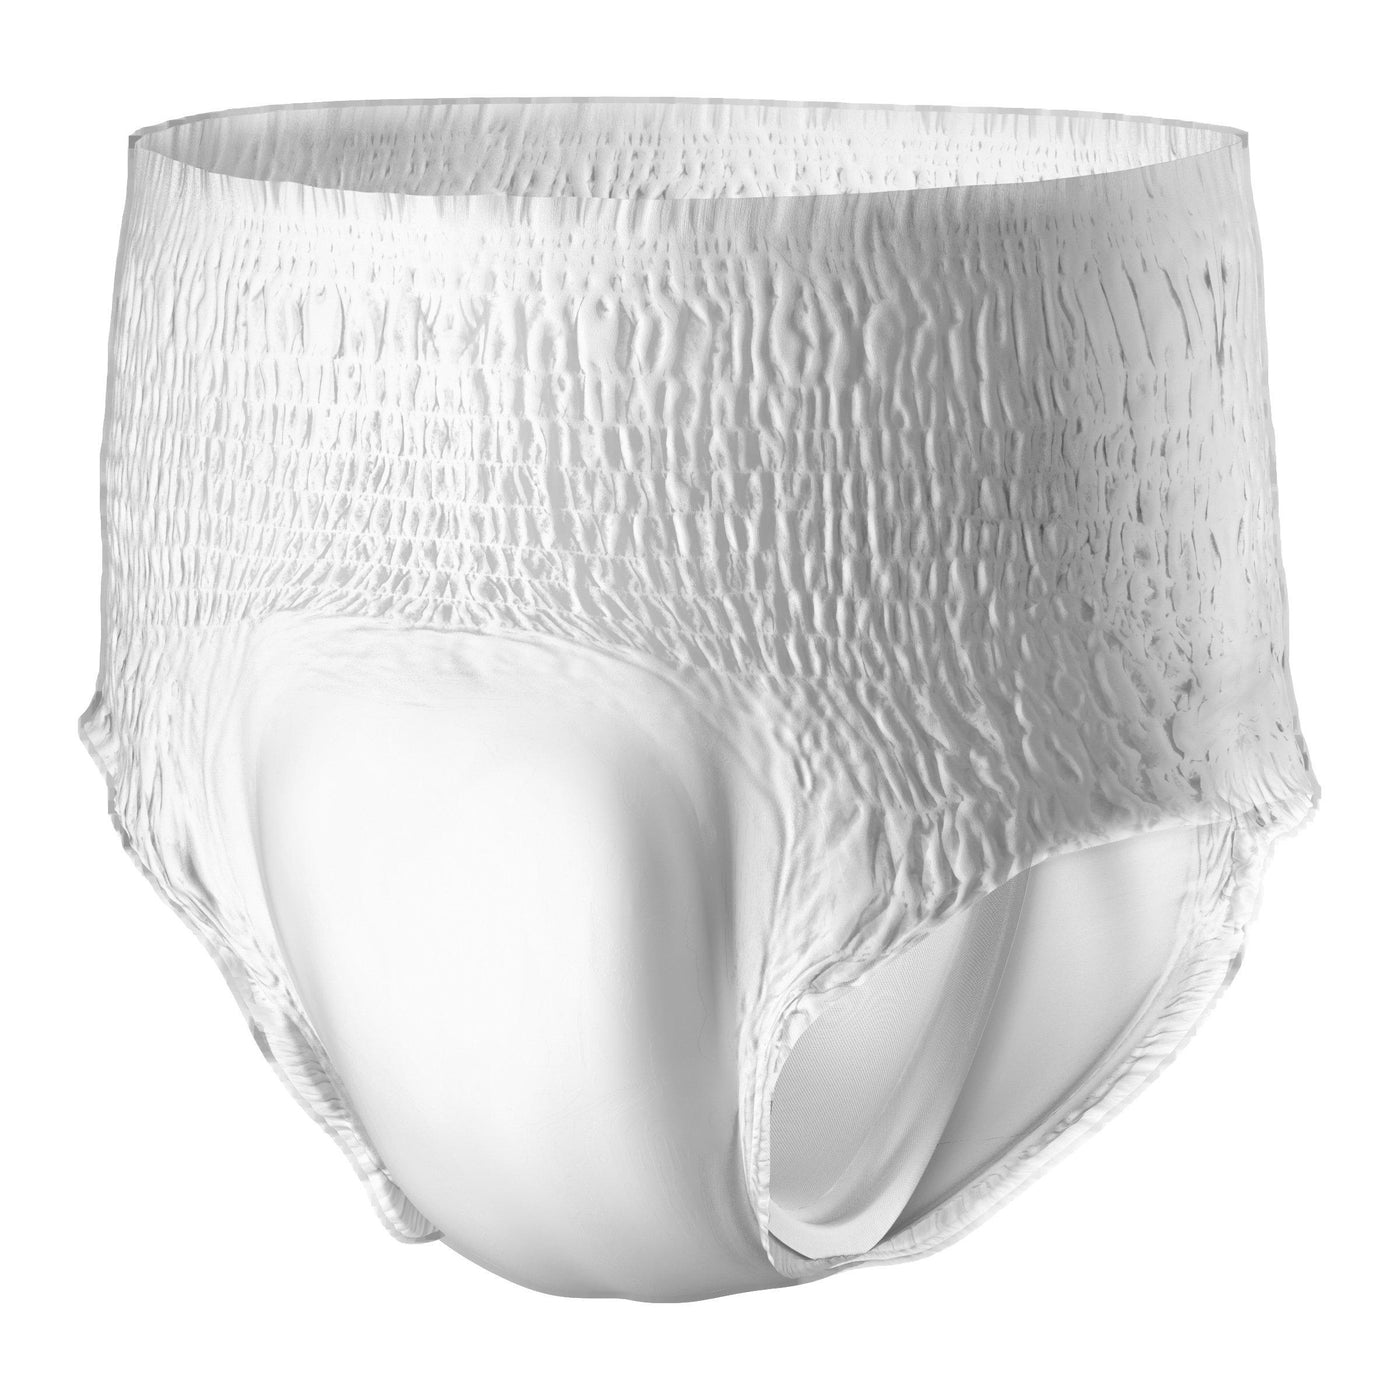 Prevail Per-Fit Women Protective Underwear - Incontinence Product